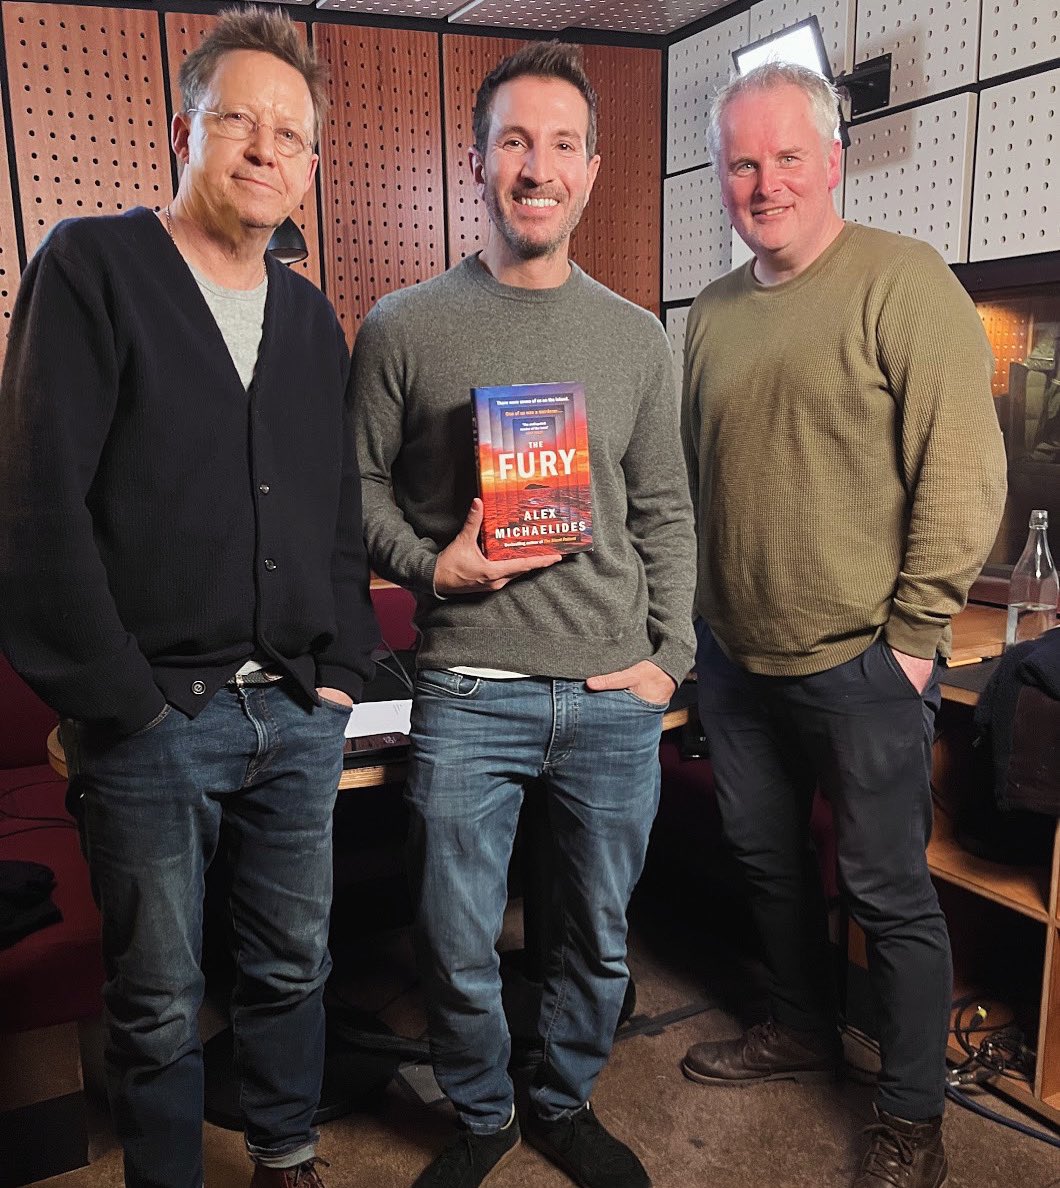 Bestselling author and screenwriter @AlexMichaelides joined @simonmayo and @Mattm_Williams recently to chat about his new novel #thefury You can hear both our episodes with him here! 👇 podfollow.com/1402579687 Anyone read his new one yet? #booksoftheyear #bookchat #books